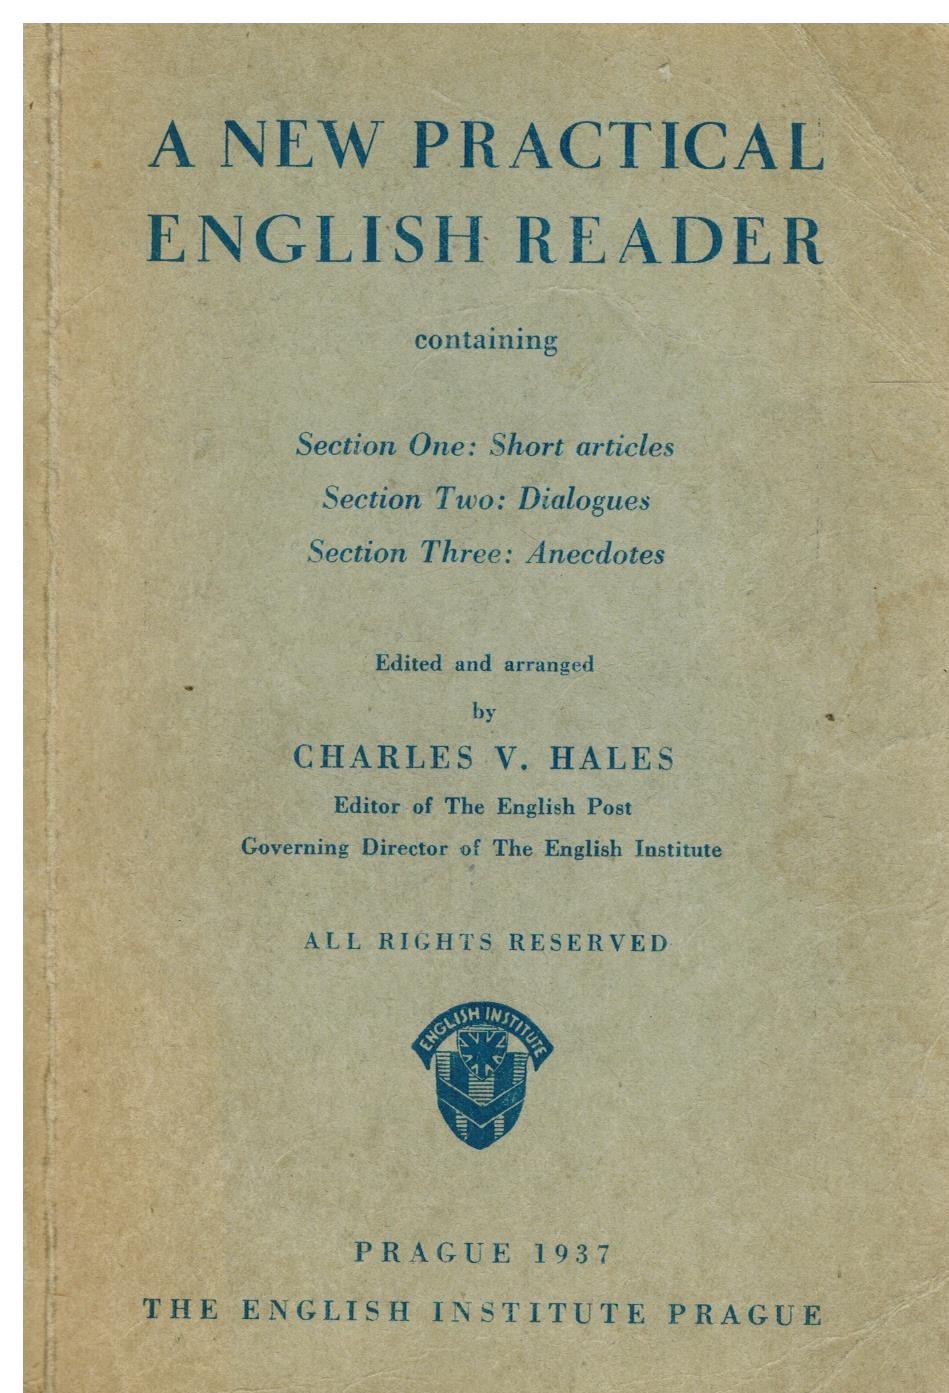 A NEW PRACTICAL ENGLISH READER